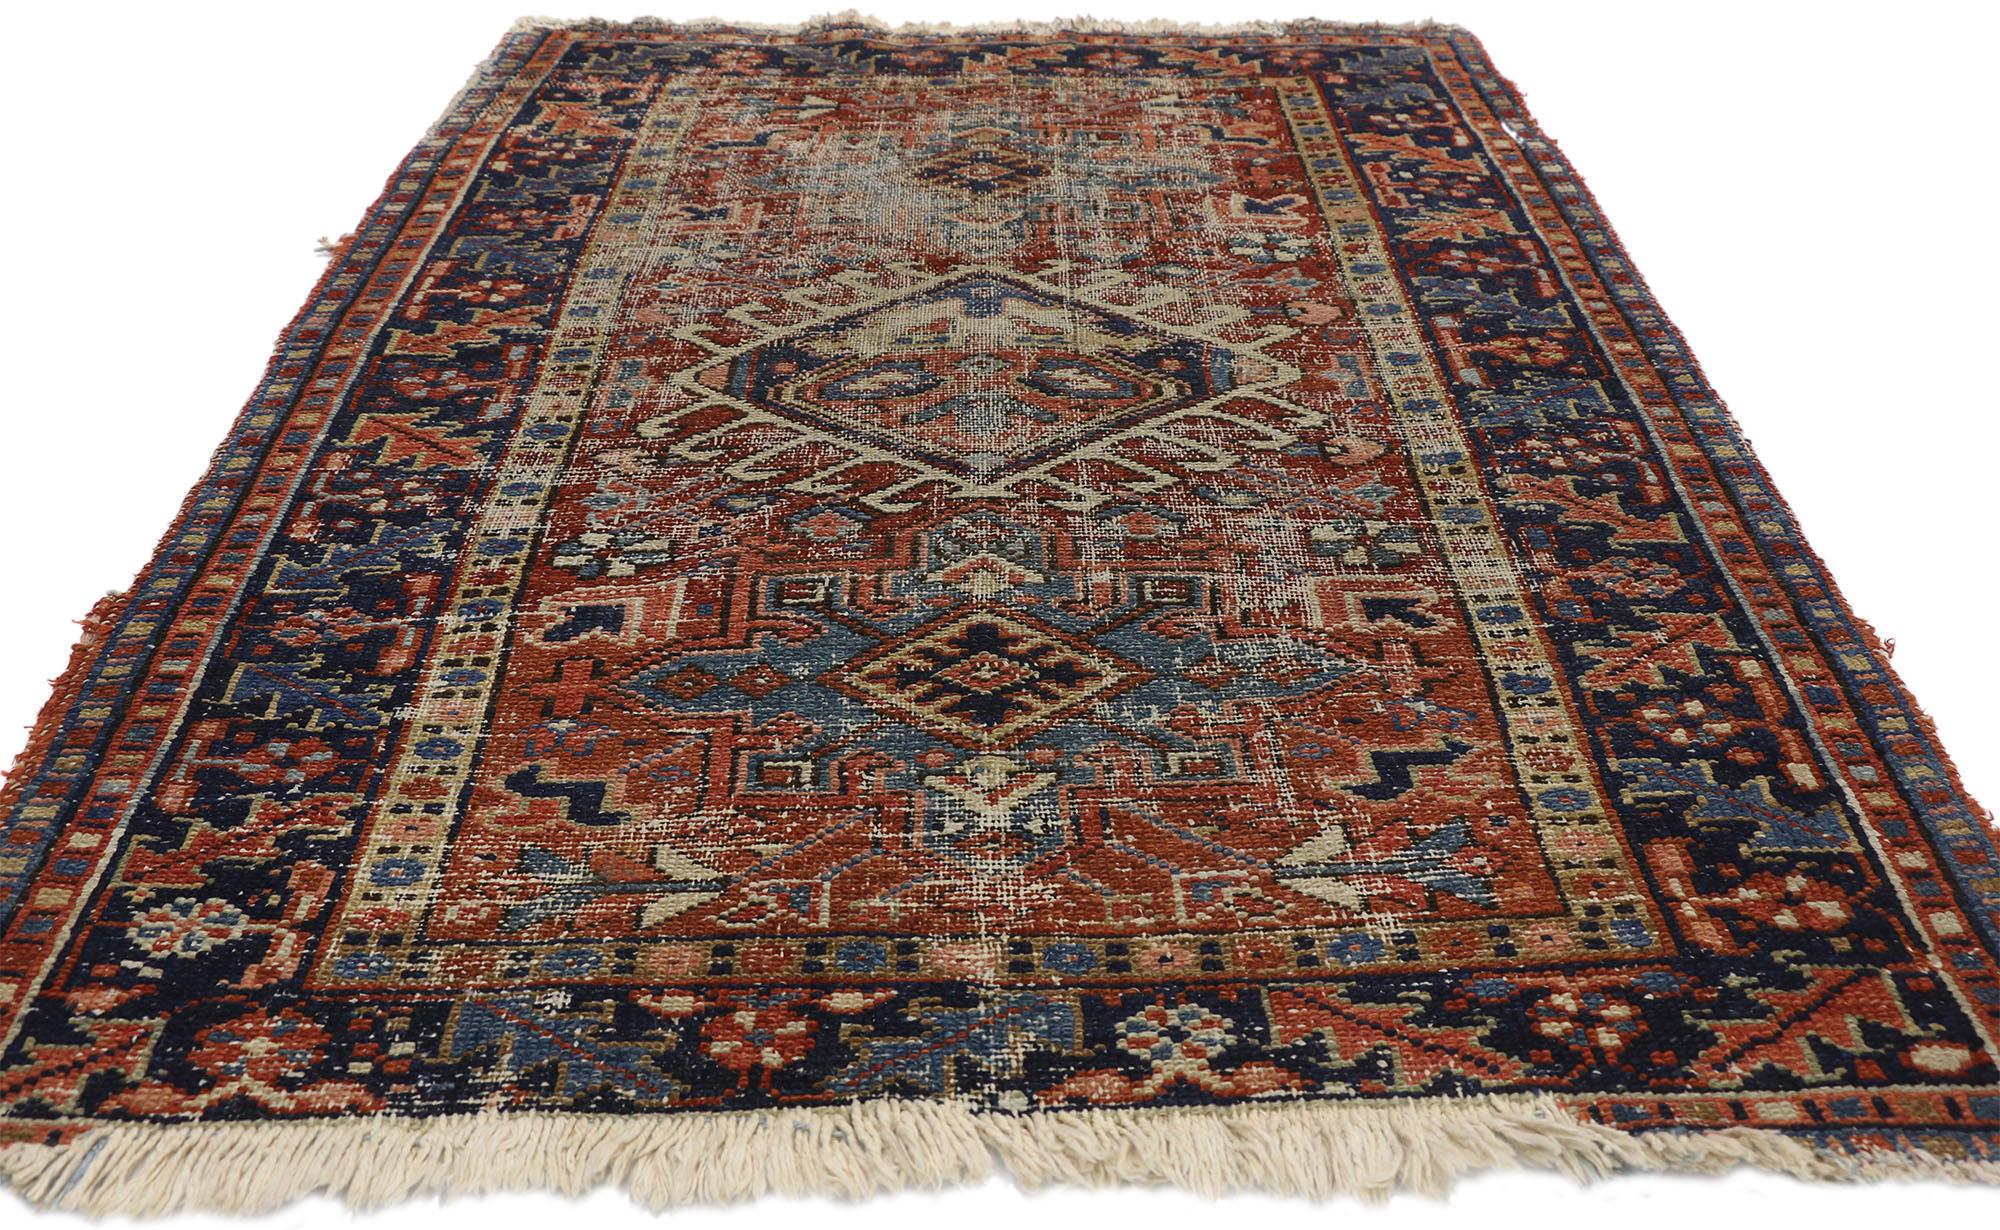 Hand-Knotted Distressed Antique Persian Heriz Karaja Rug with Rustic Artisan Style